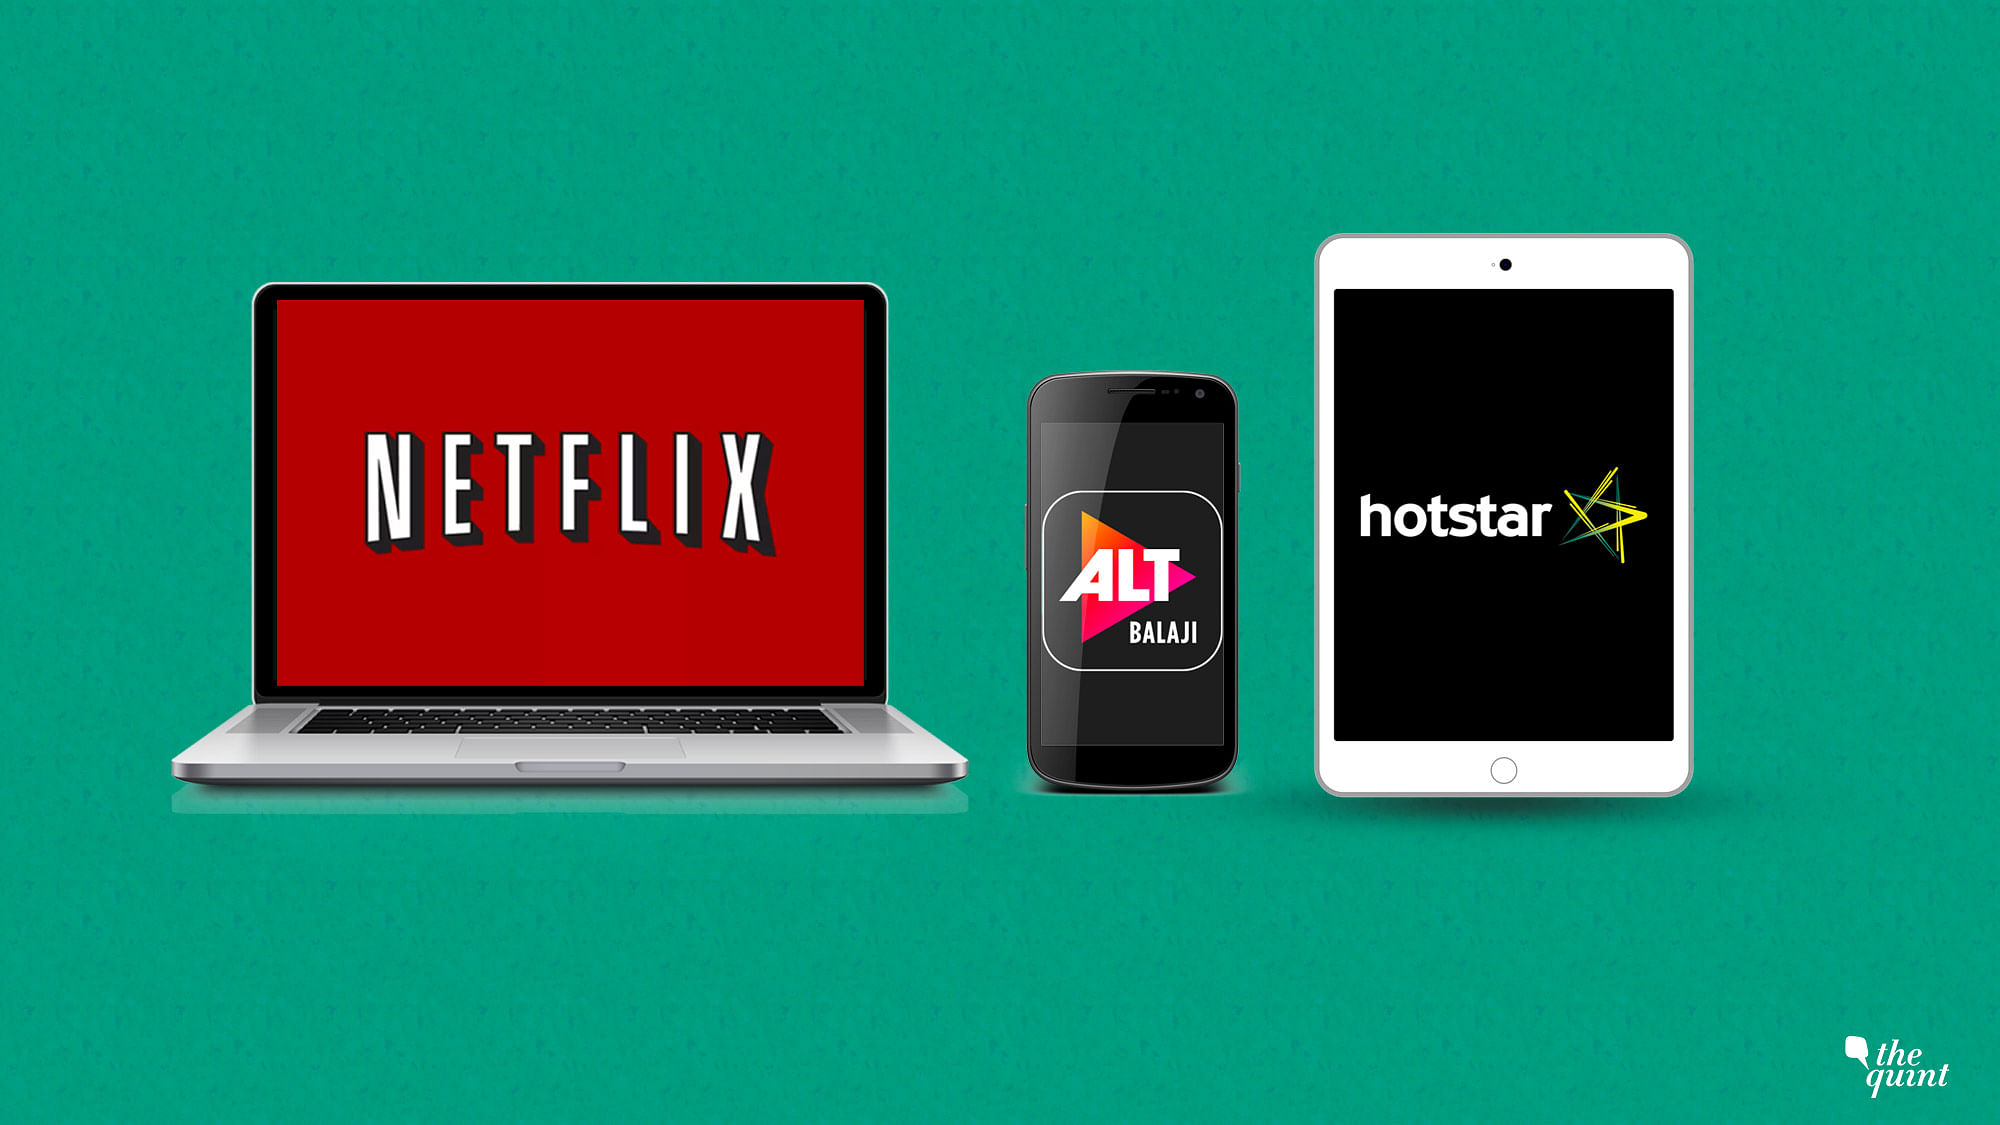 Top streaming platforms could push down their content quality from HD to SD.